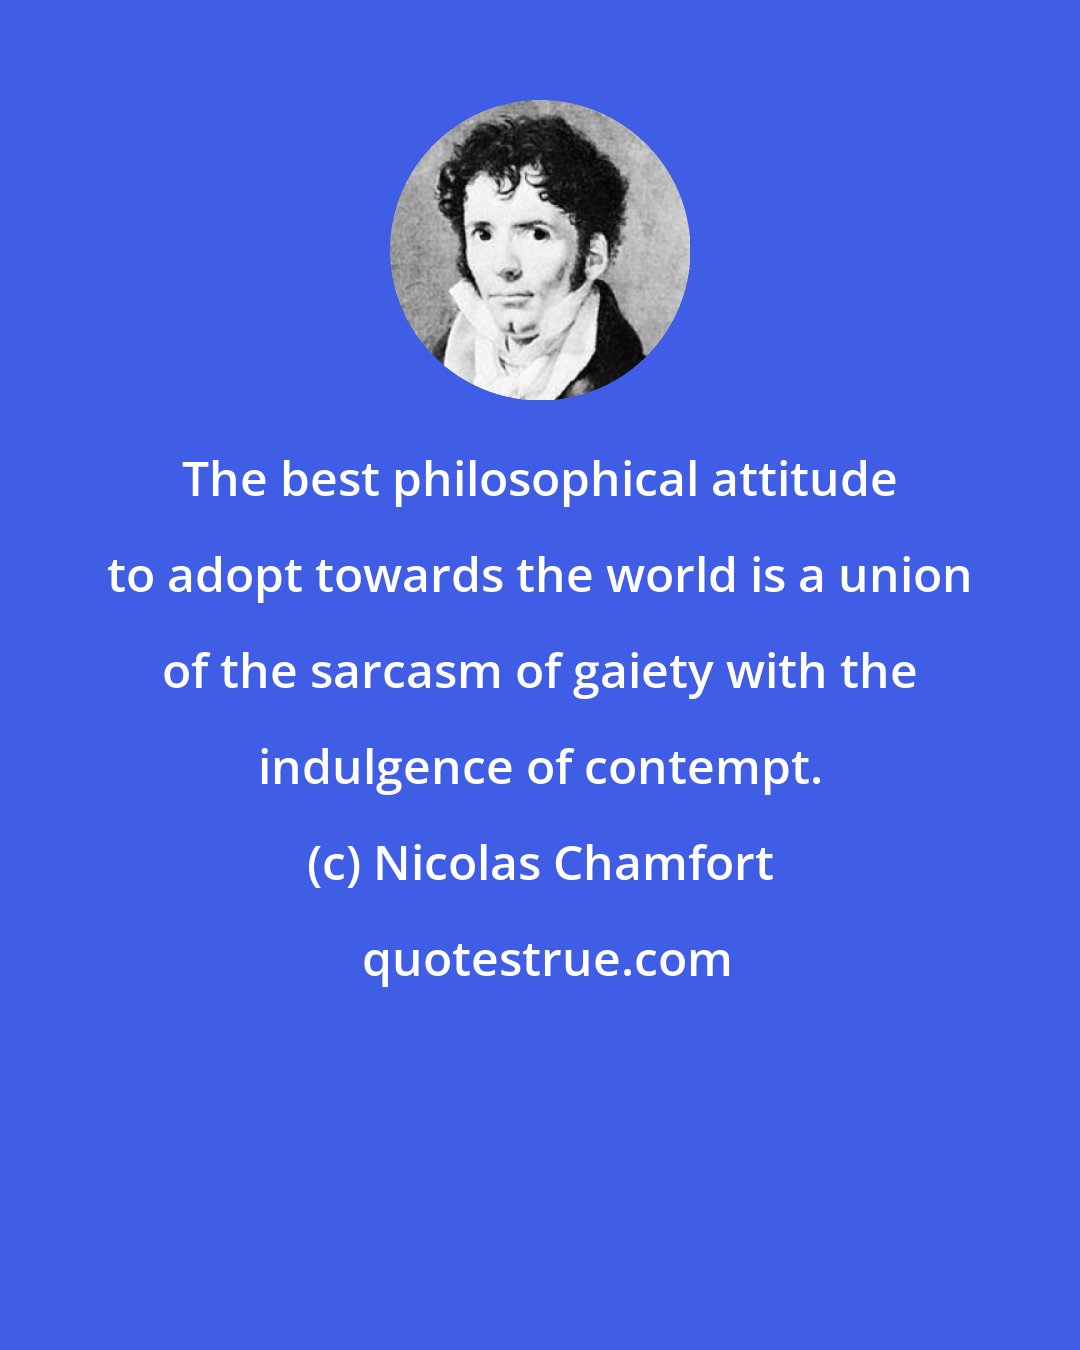 Nicolas Chamfort: The best philosophical attitude to adopt towards the world is a union of the sarcasm of gaiety with the indulgence of contempt.